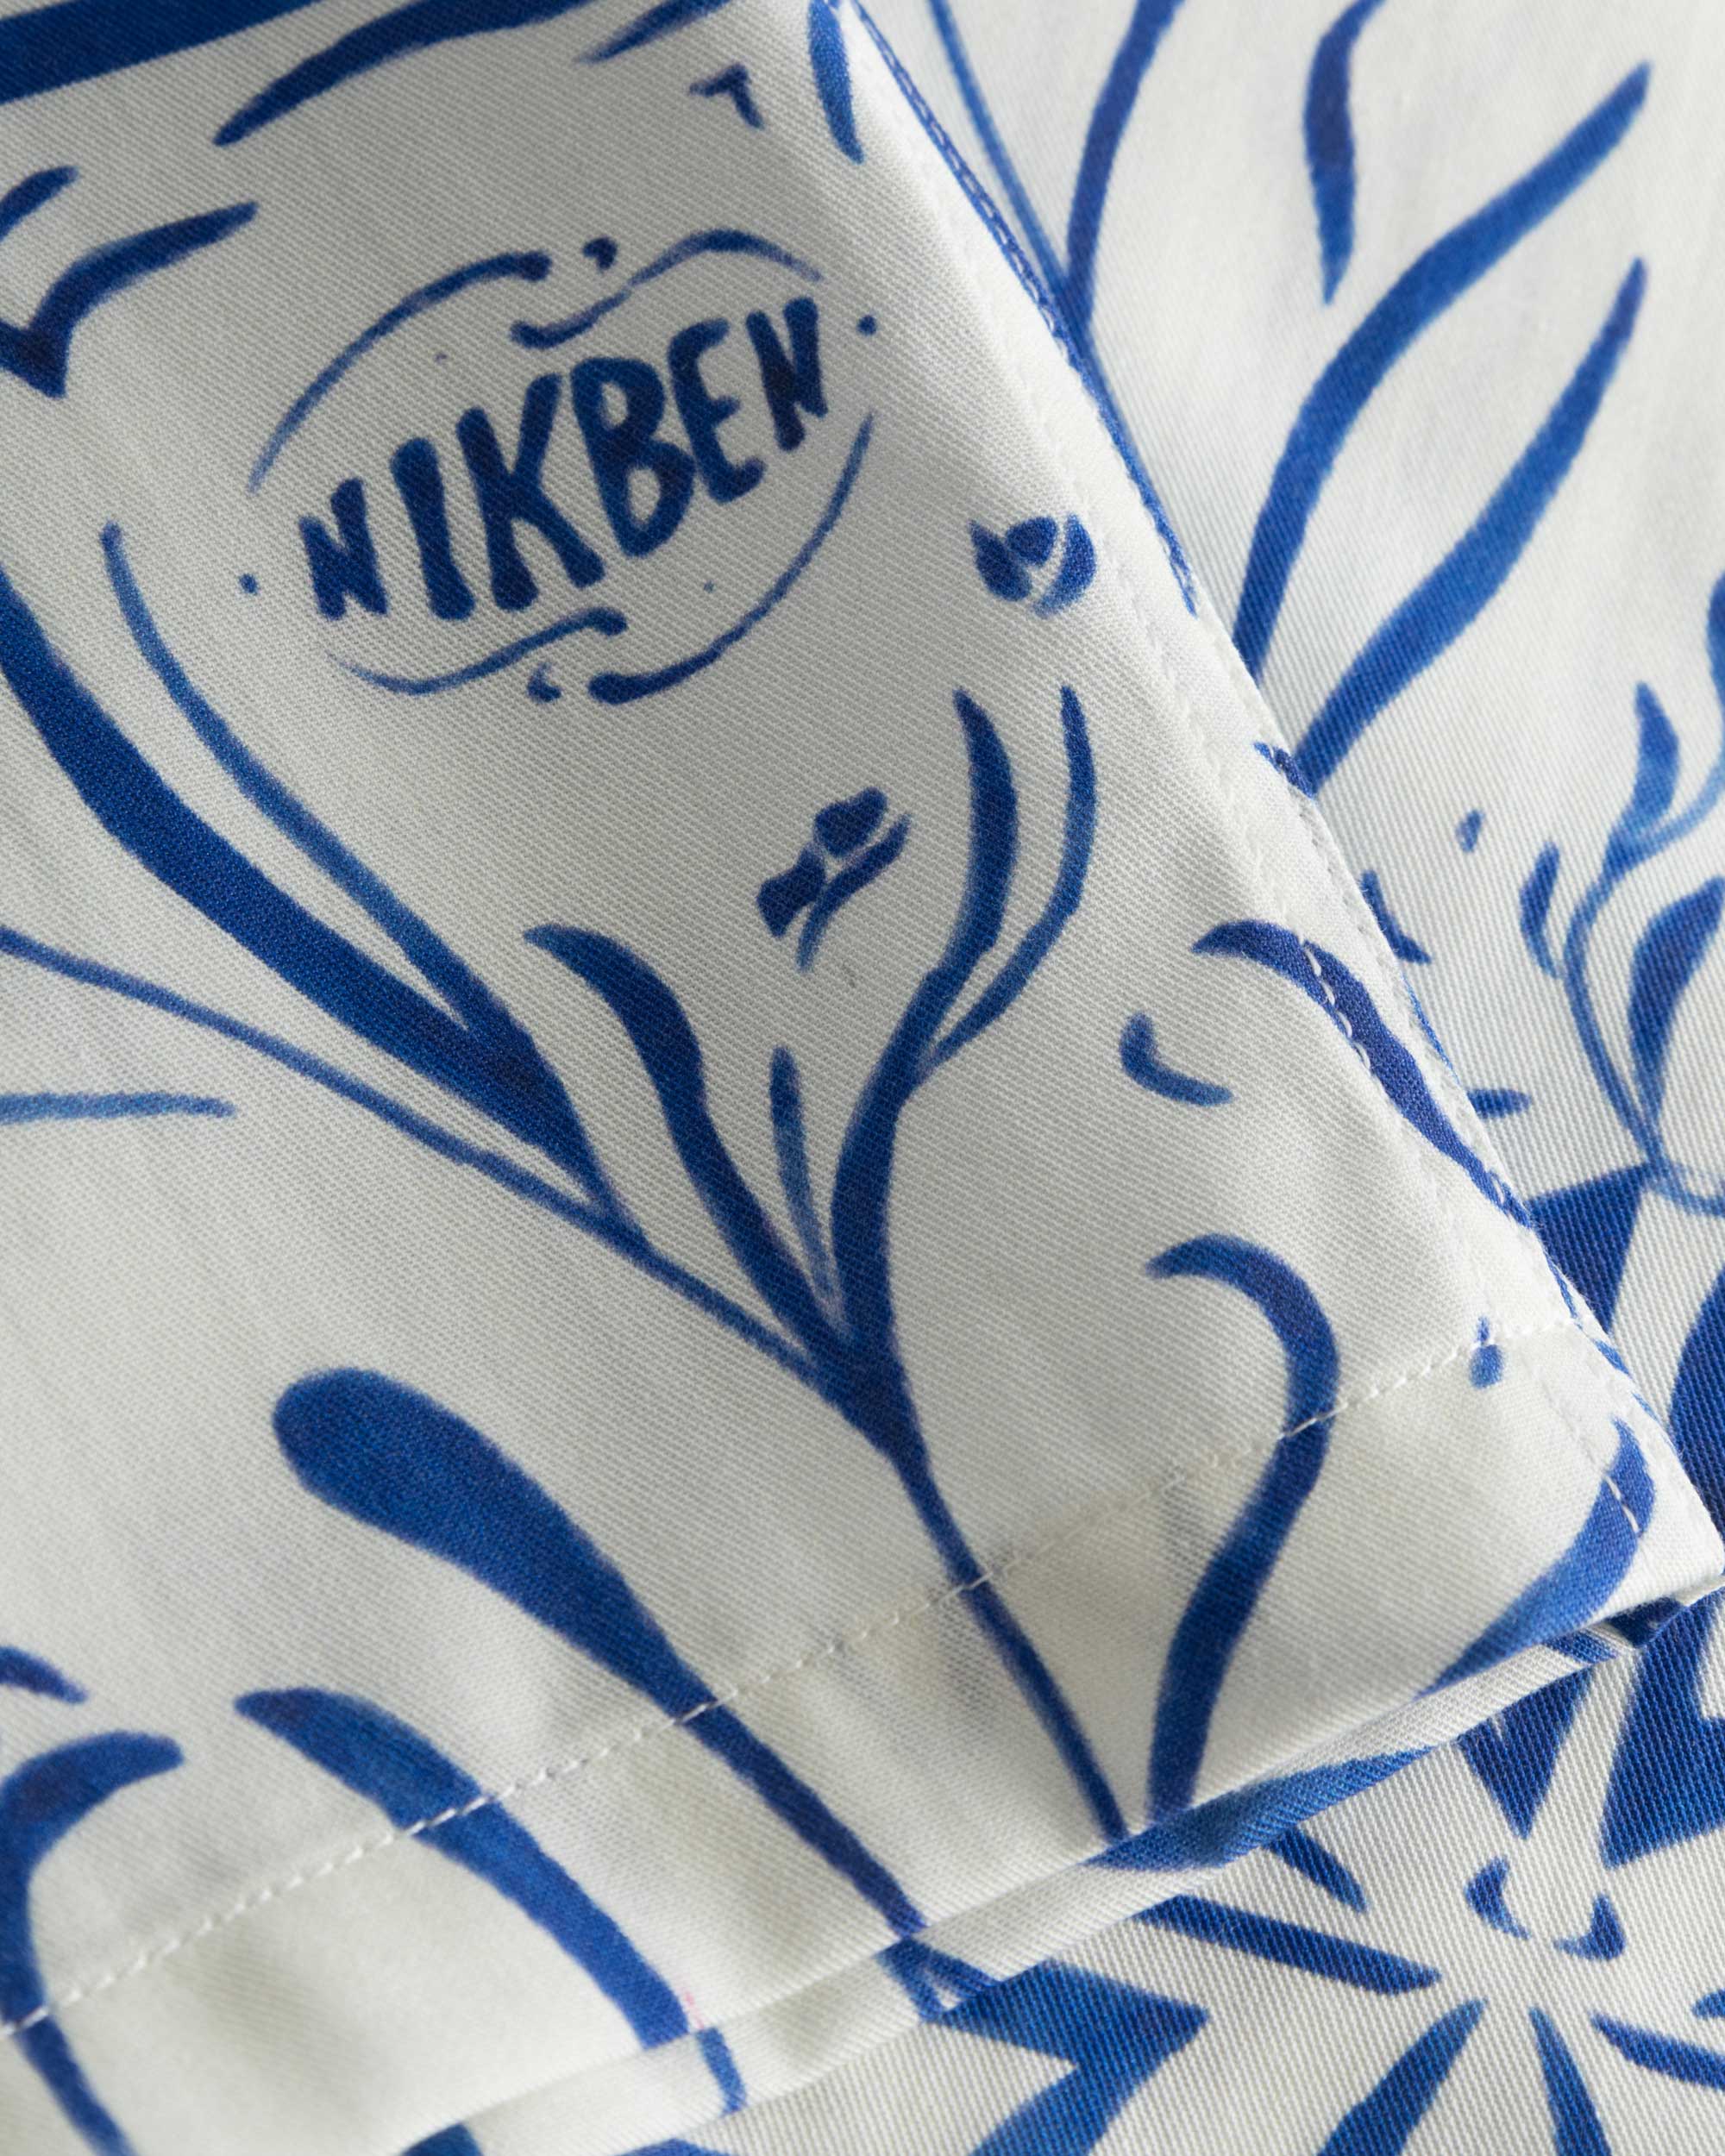 Close-up of the stitchings on a white short-sleeved vacation shirt with blue graphic pattern.